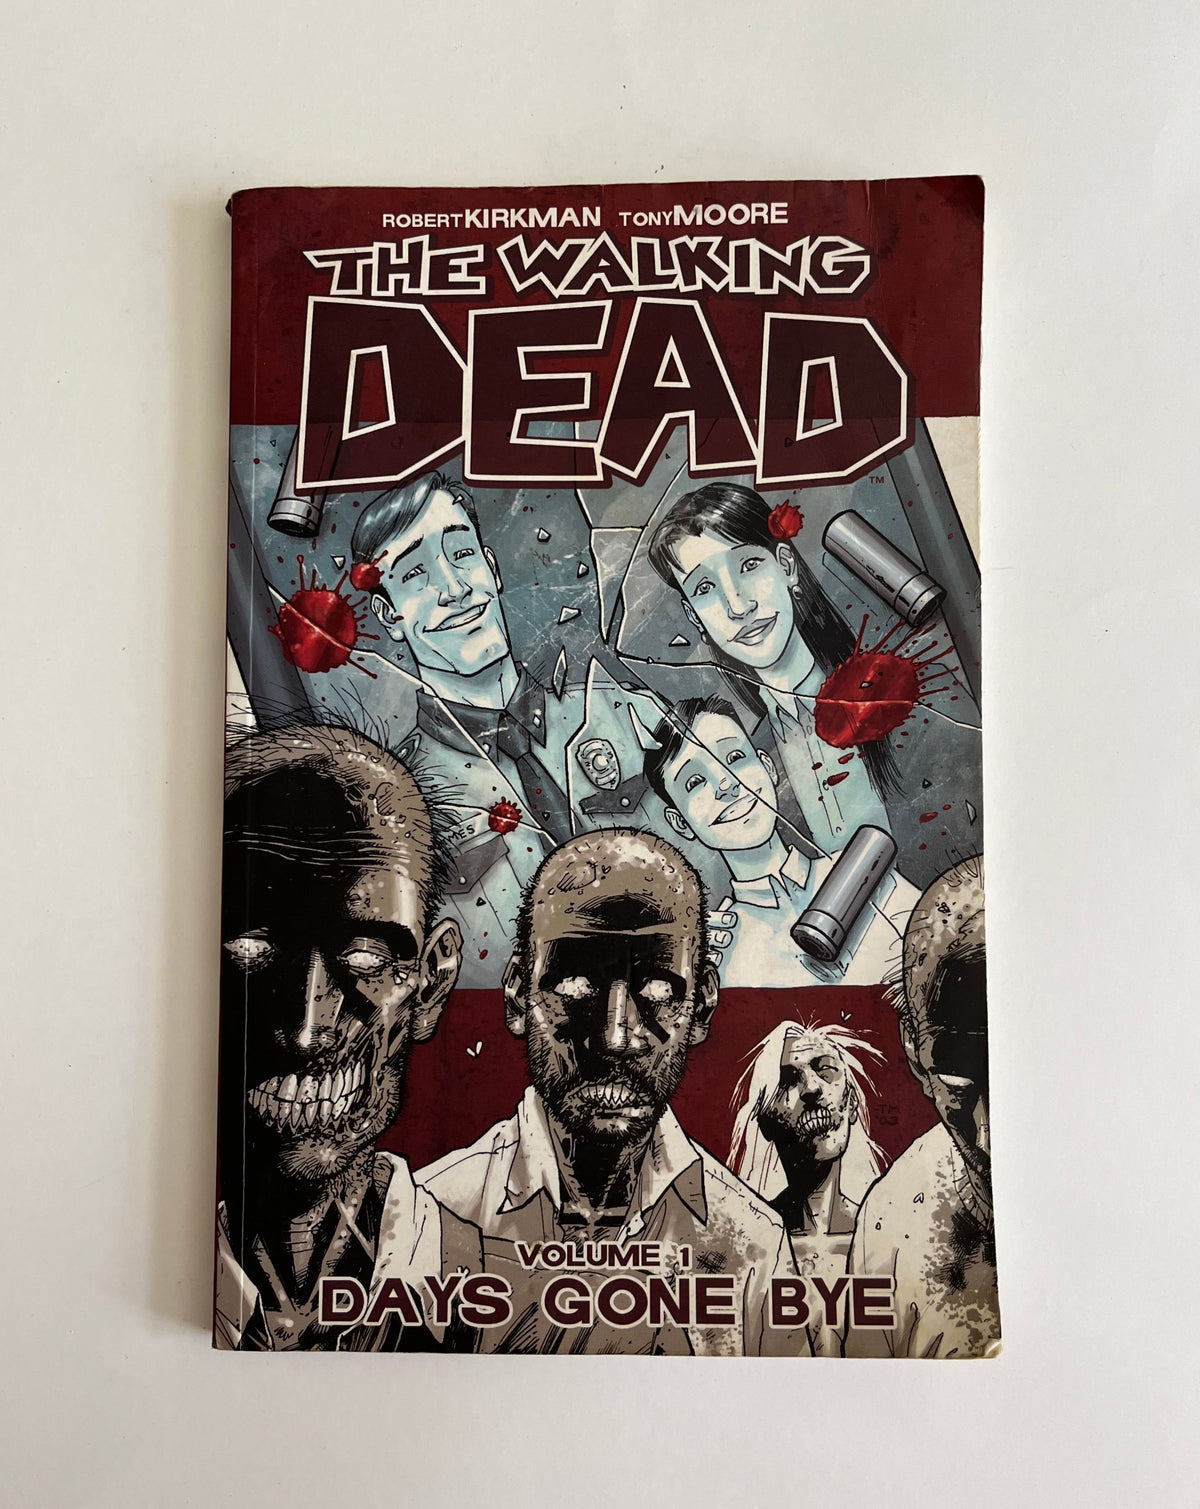 The Walking Dead: Days Gone Bye Volume 1 by Robert Kirkman and Tony Moore